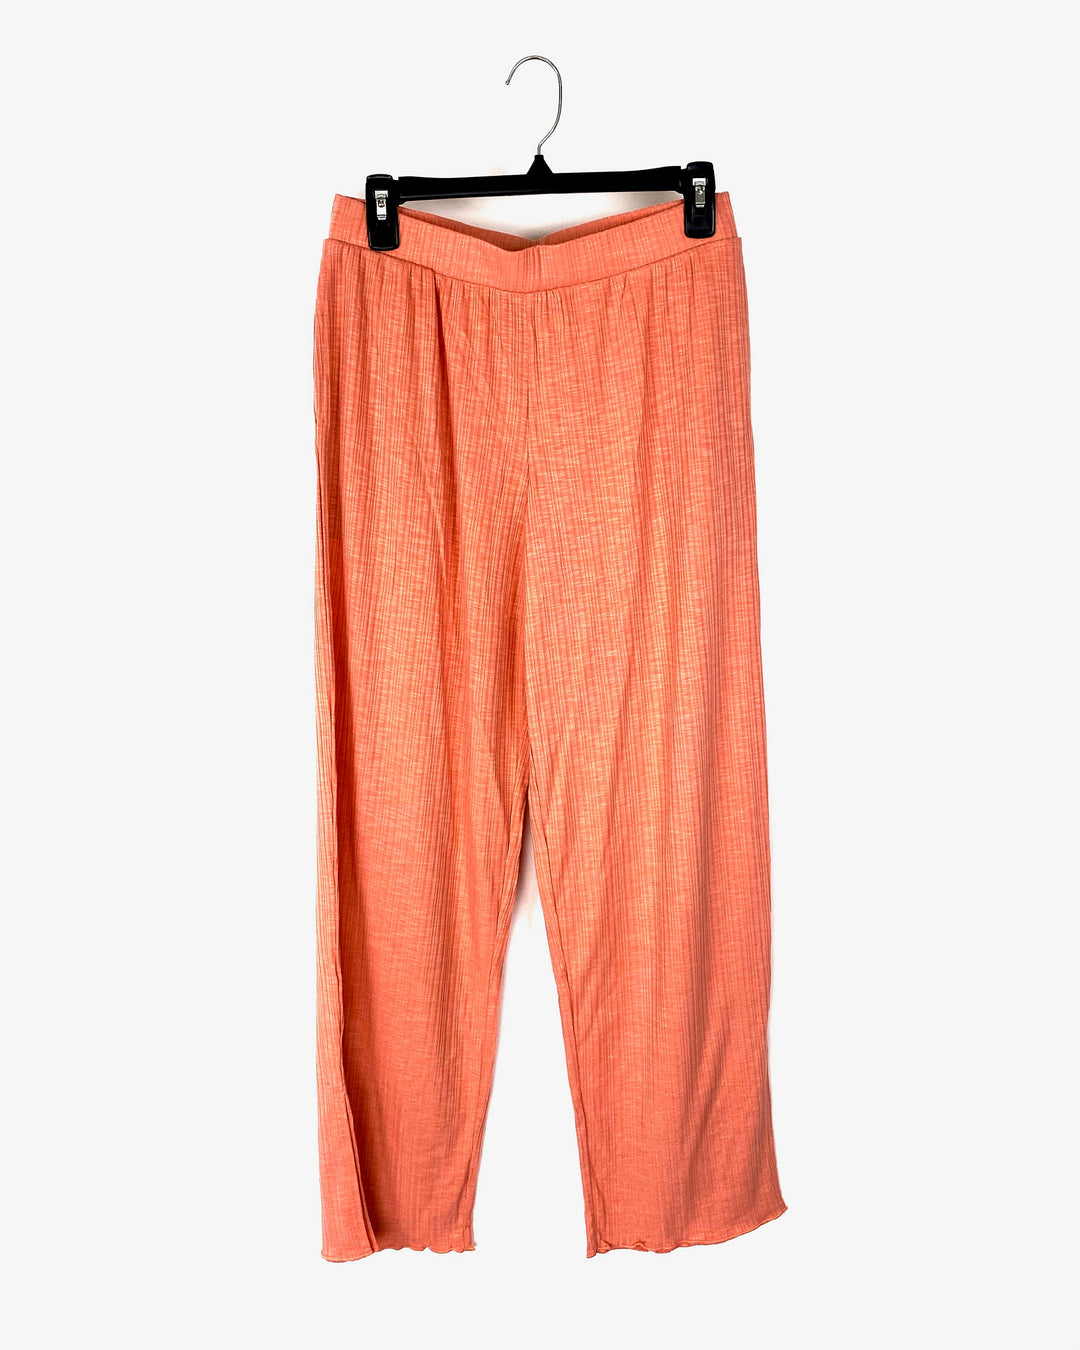 Peach Ribbed Flowy Pants - Small and Medium